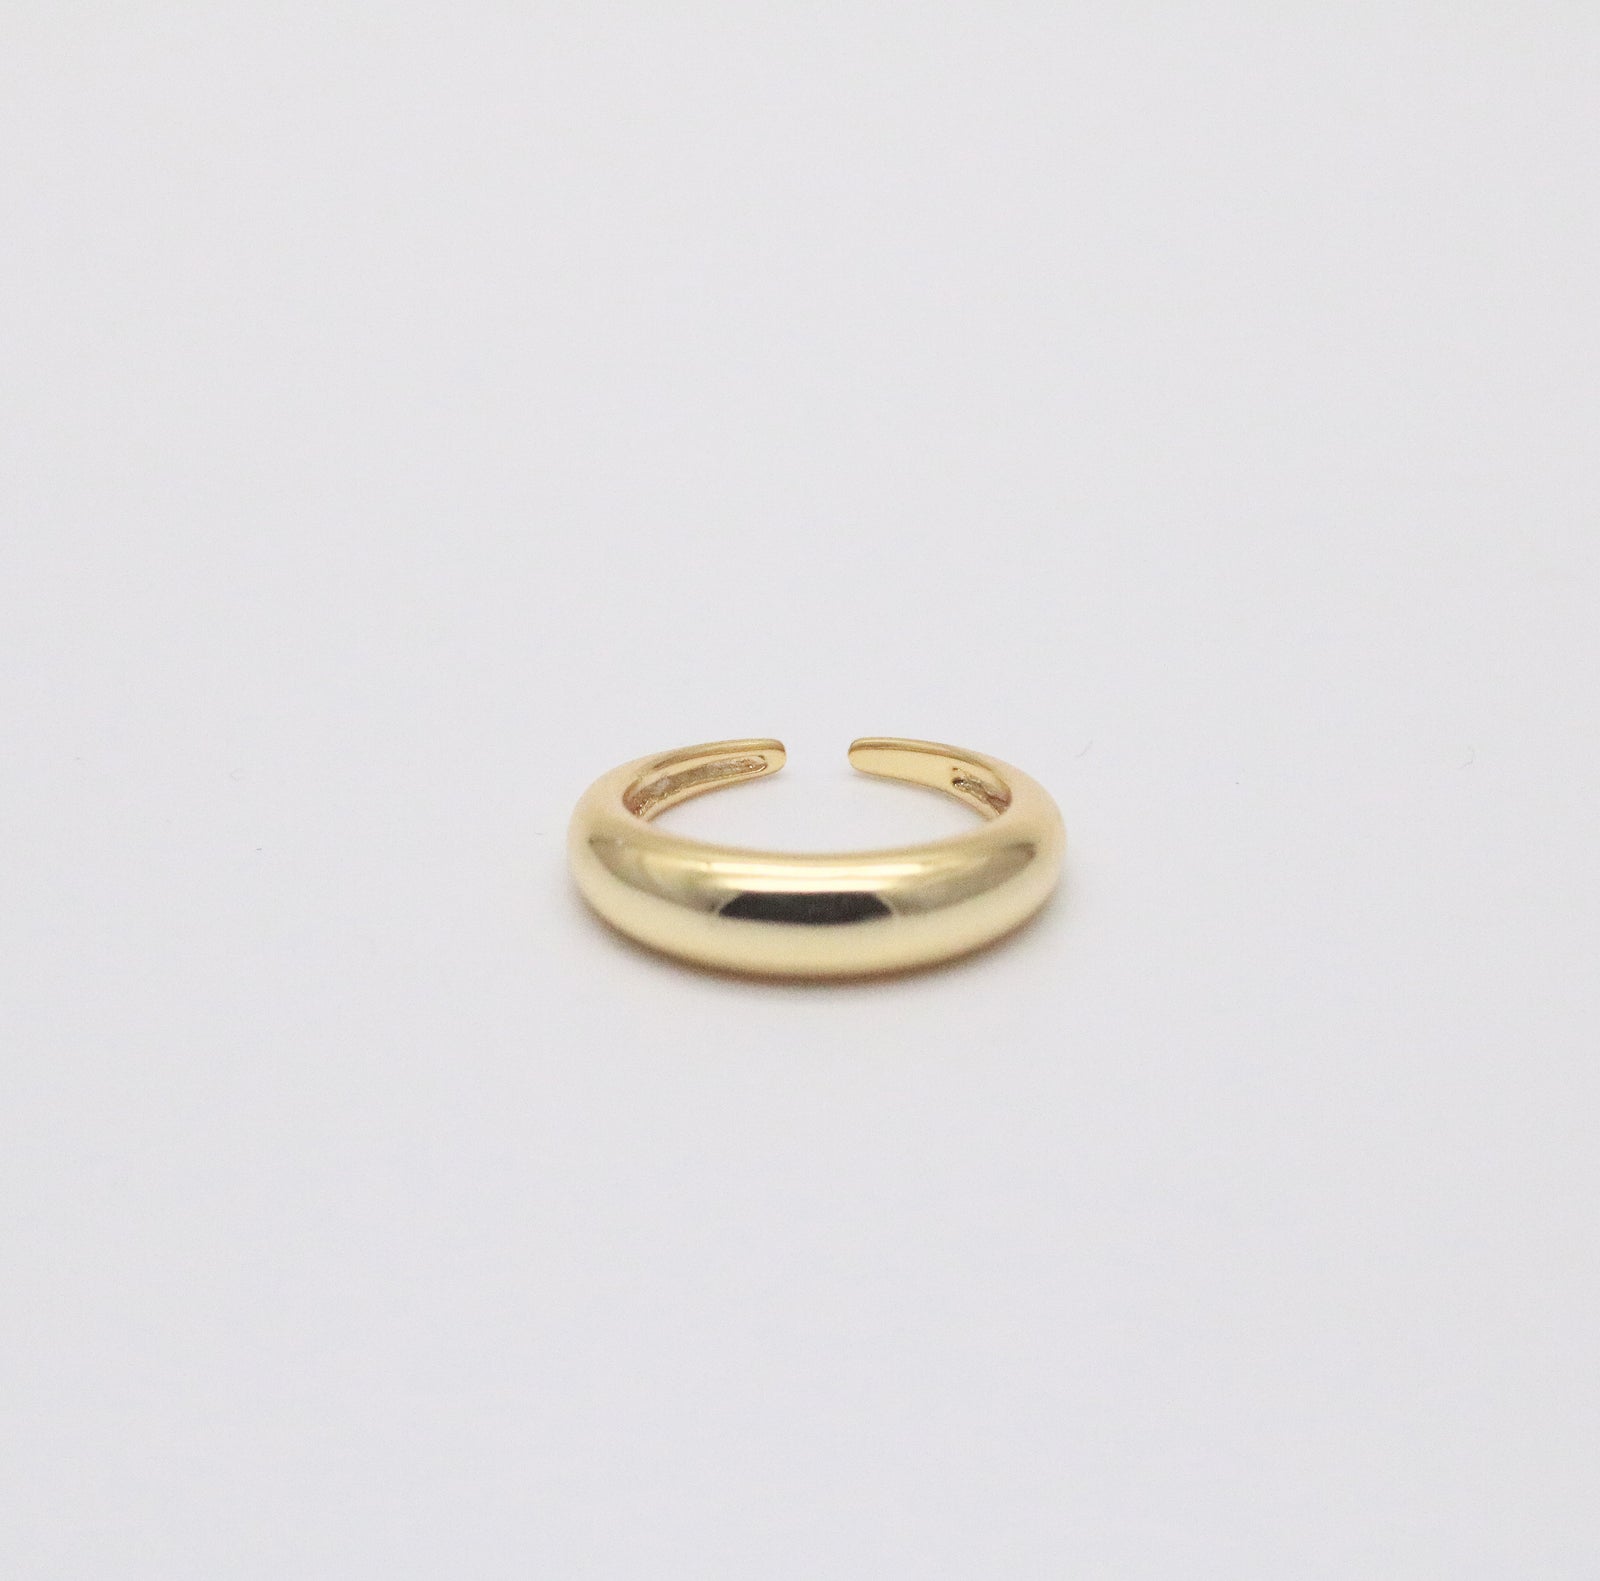 The mia ring in 18k gold plated sterling silver